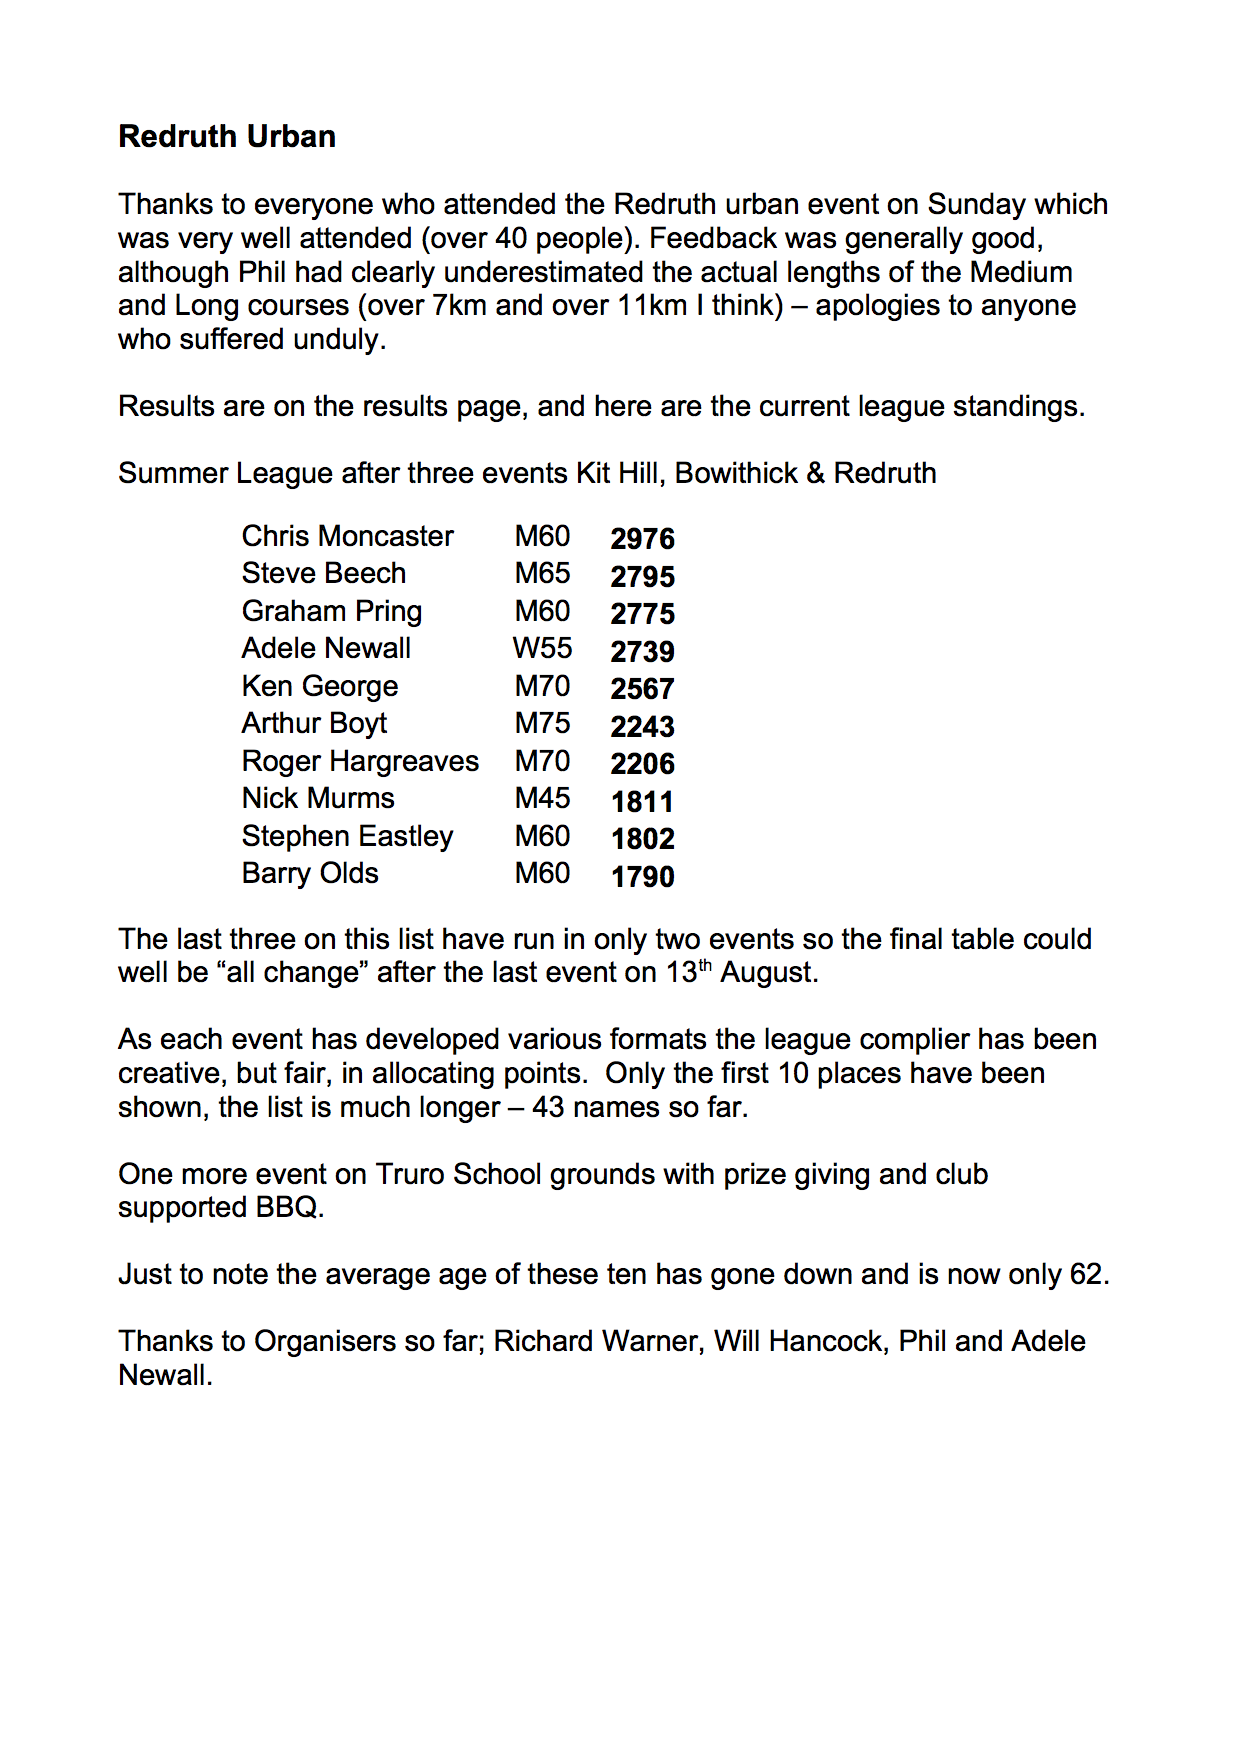 Summer League and Redruth results